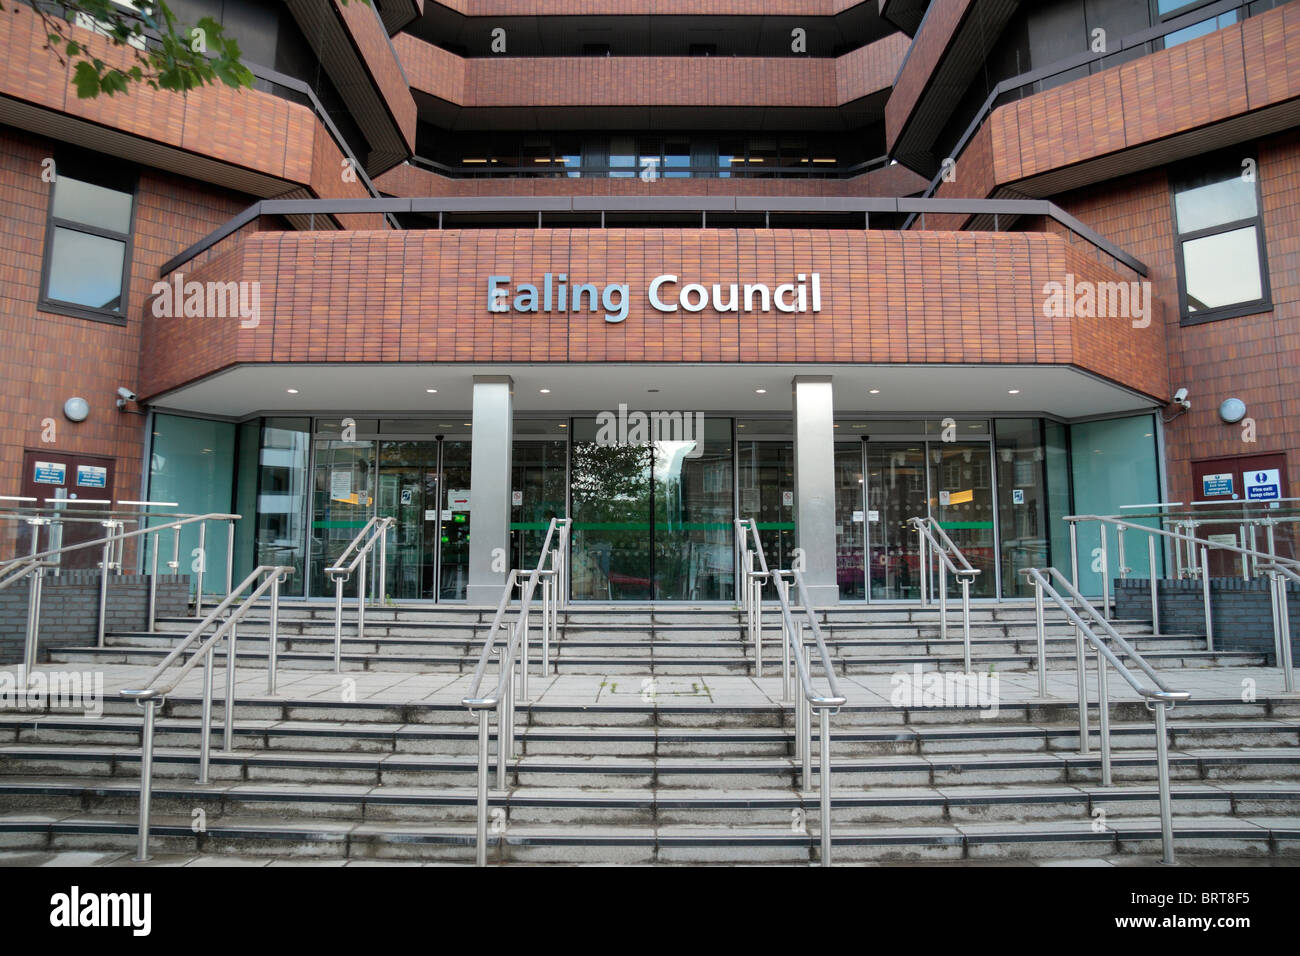 The main offices of the London Borough of Ealing Council, Uxbridge Road, UK. Stock Photo